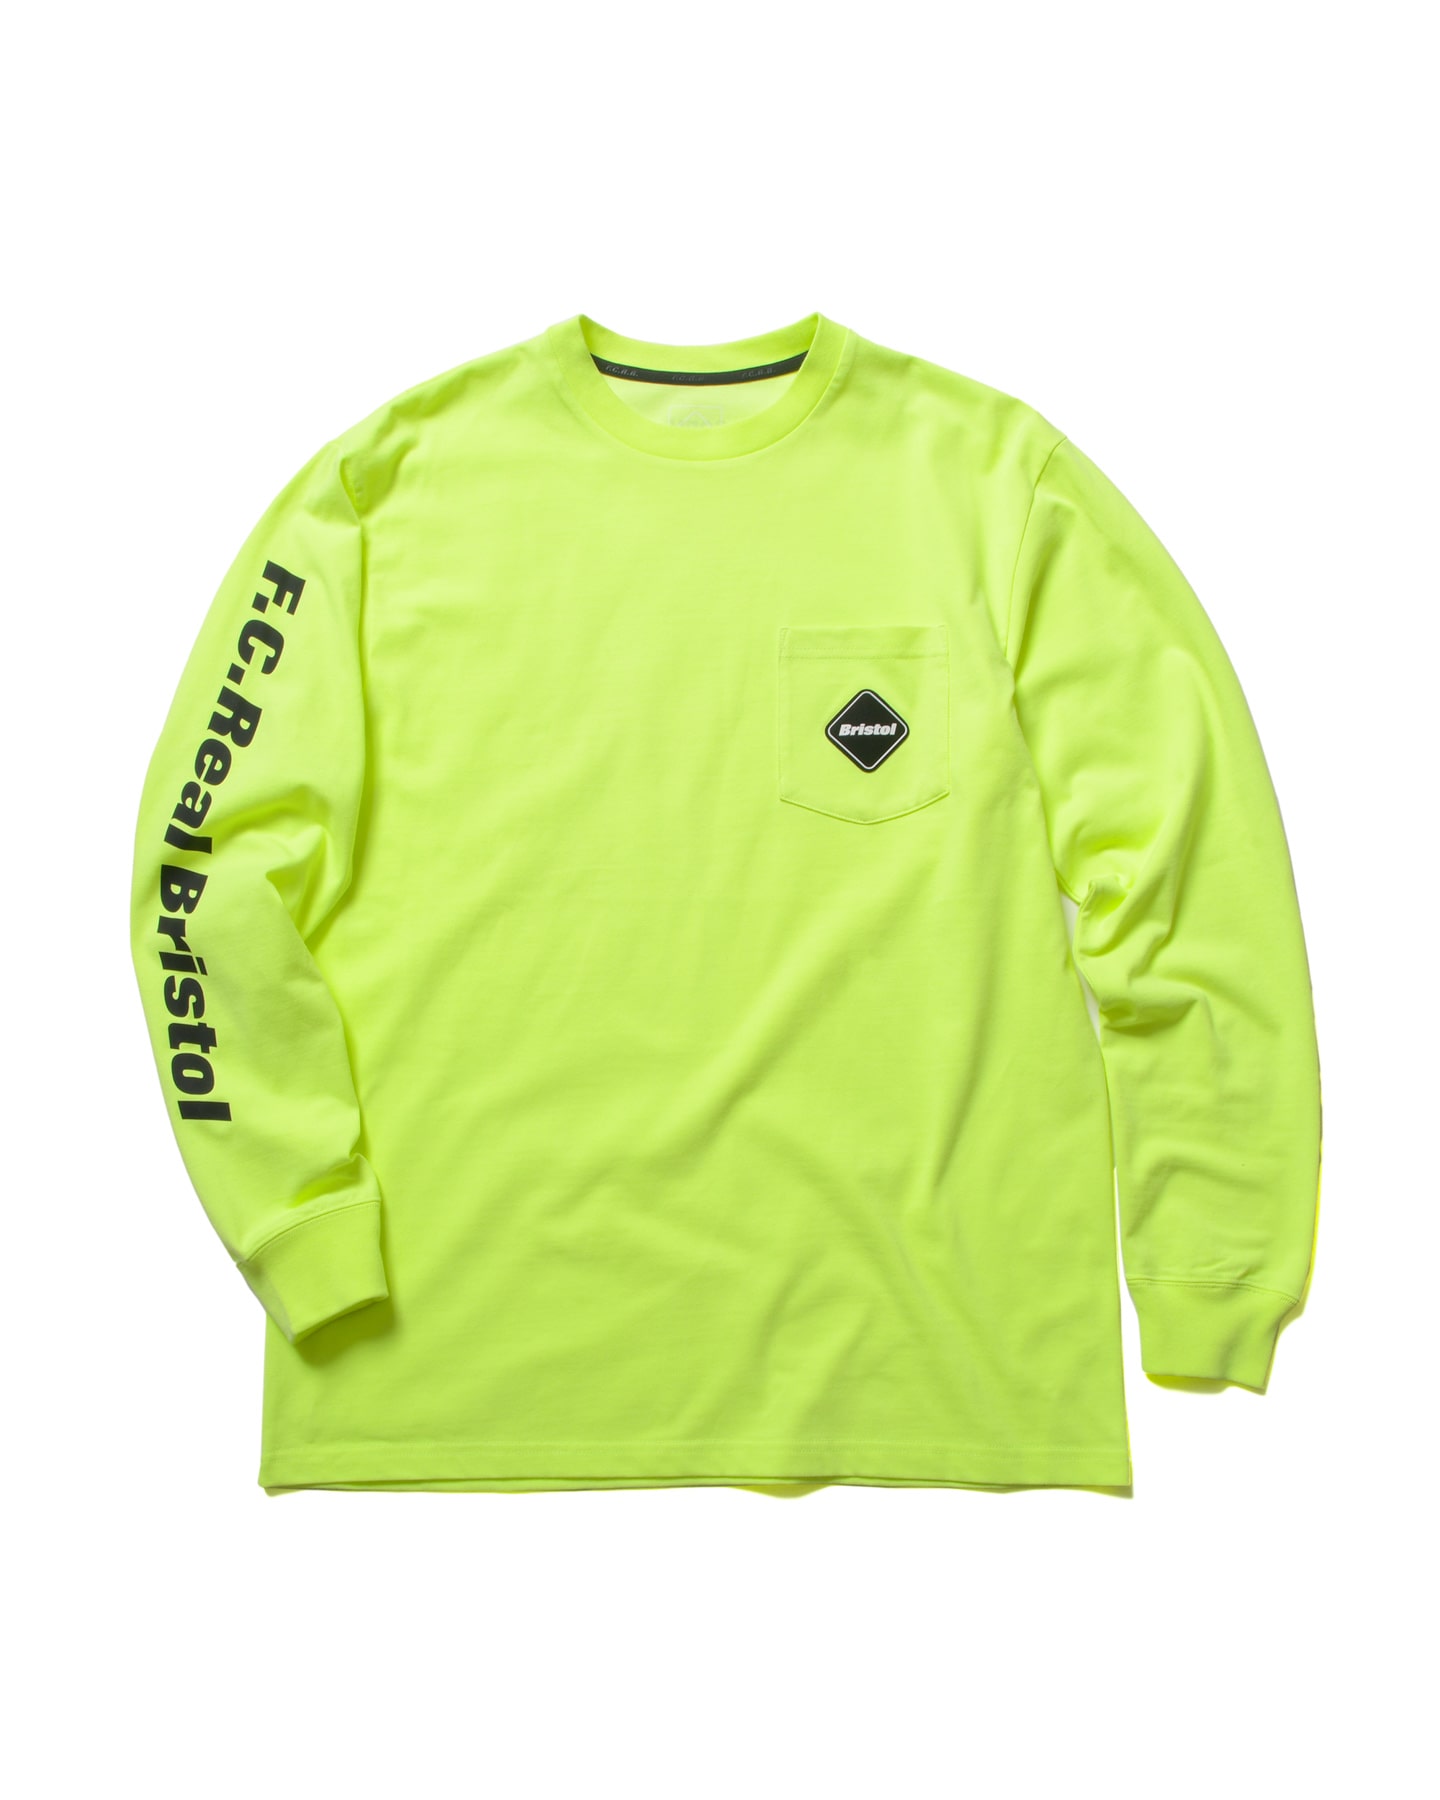 SOPH. | AUTHENTIC L/S TEAM POCKET TEE(M YELLOW):